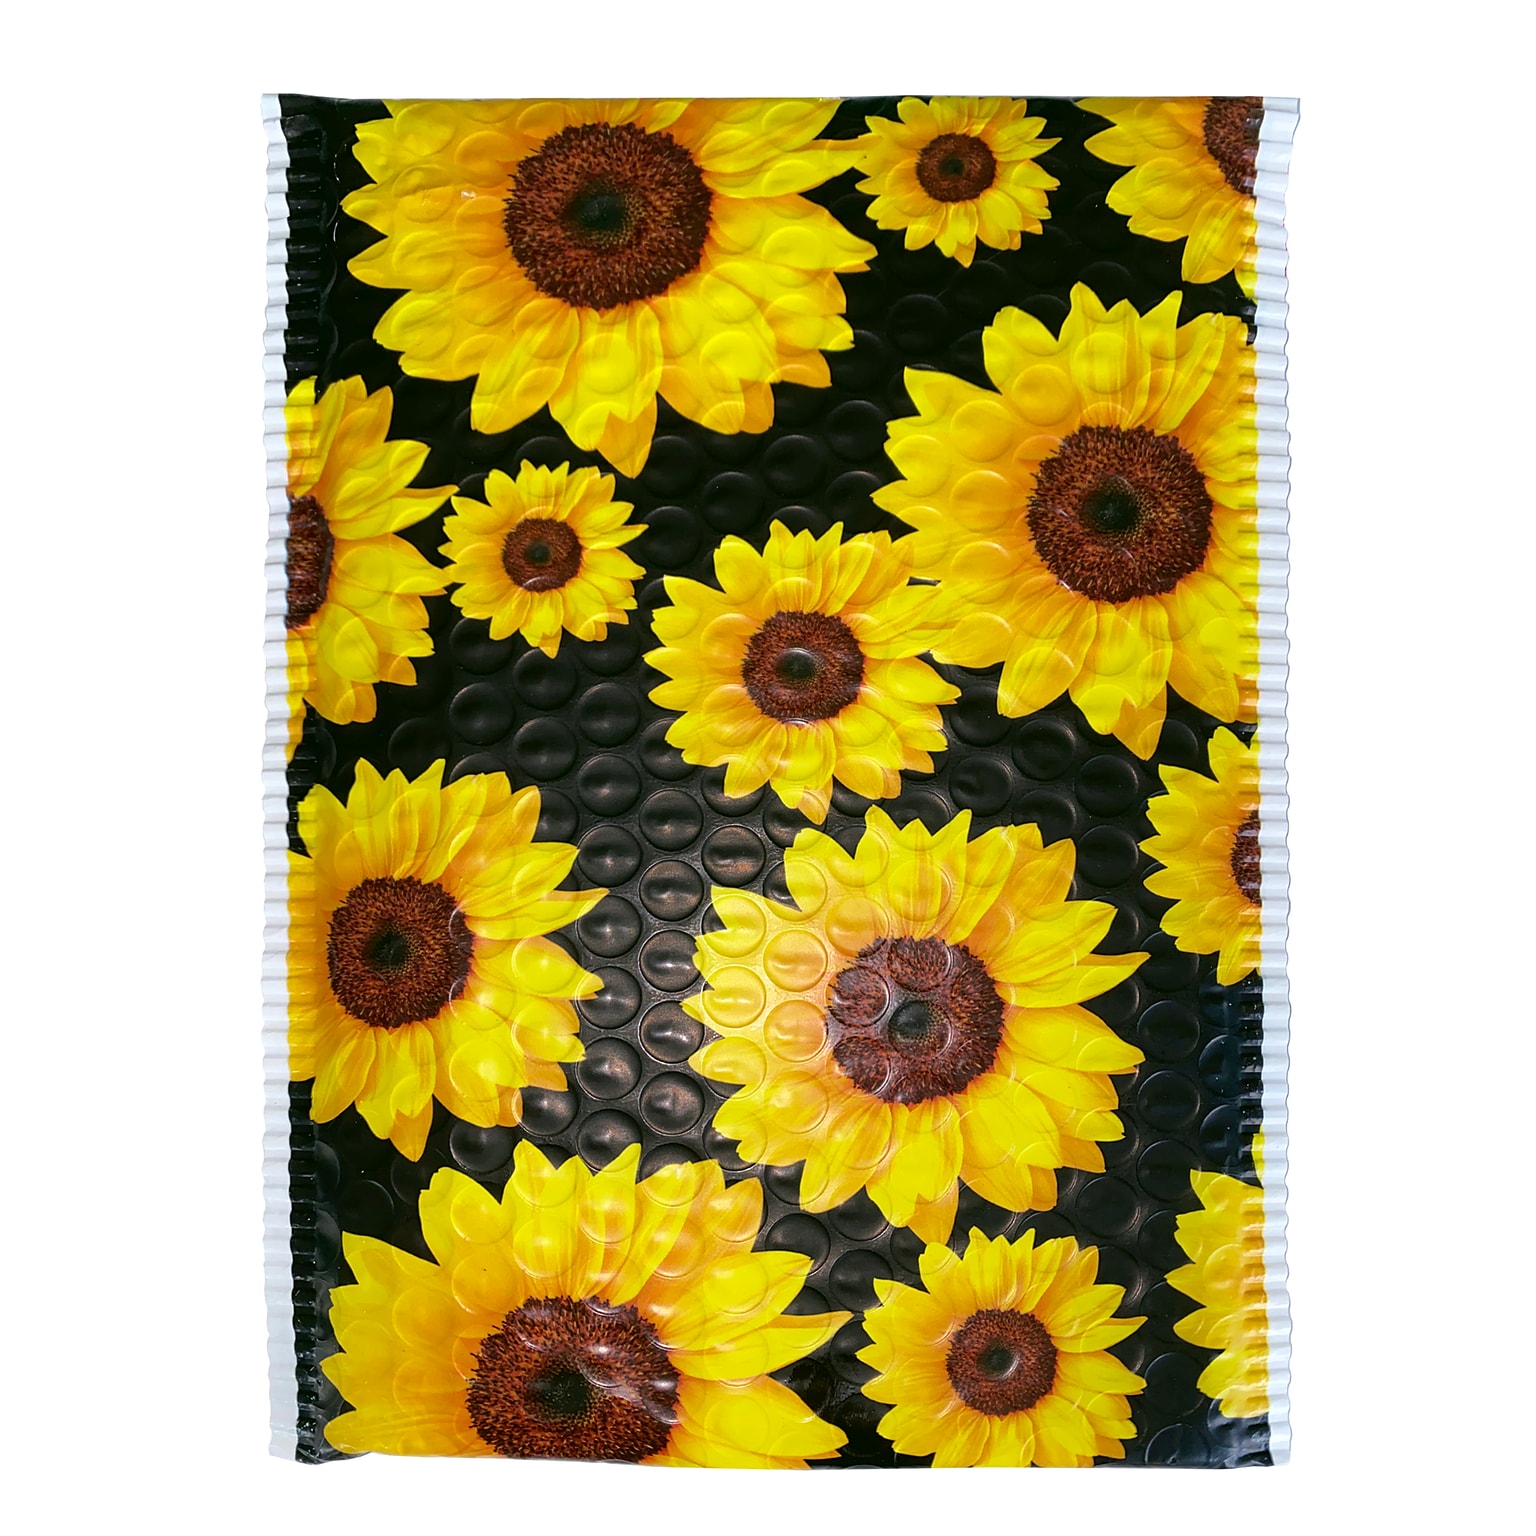 6 x 10 Bubble Mailer, Sunflowers, 50/Pack (074108)